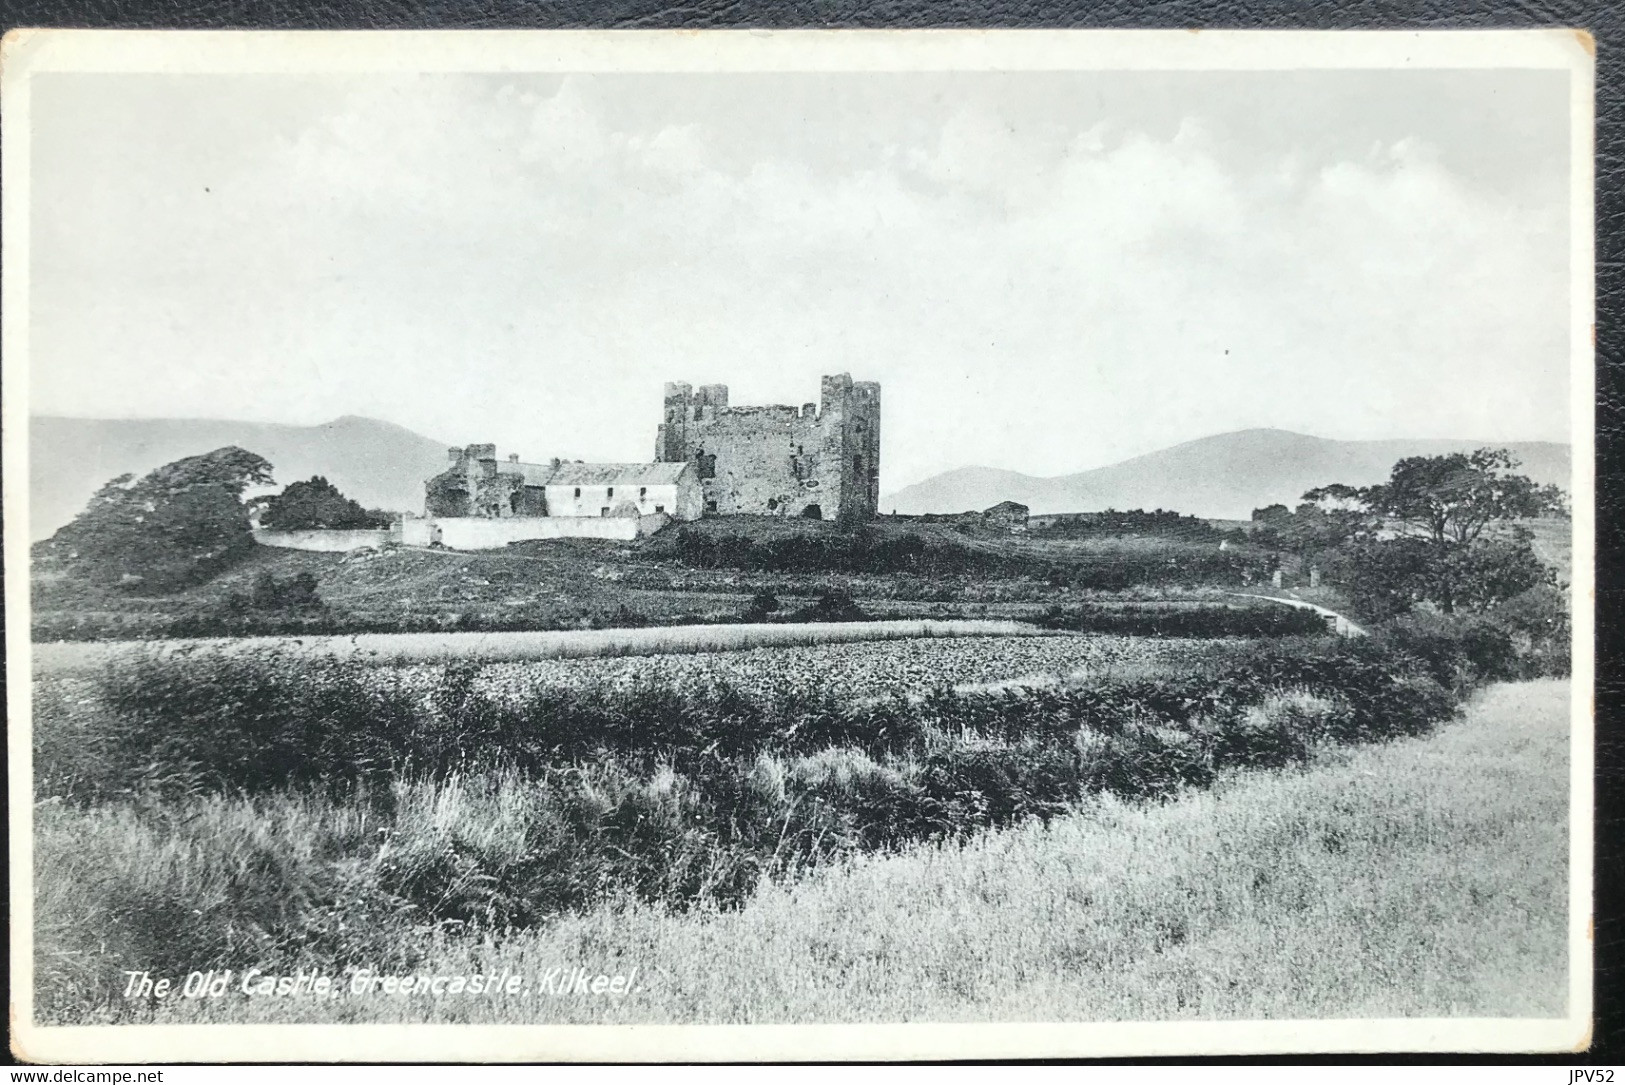 (5432) North Ireland - County Down - Kilkeel - The Old Castle ' Greencastle' - Down